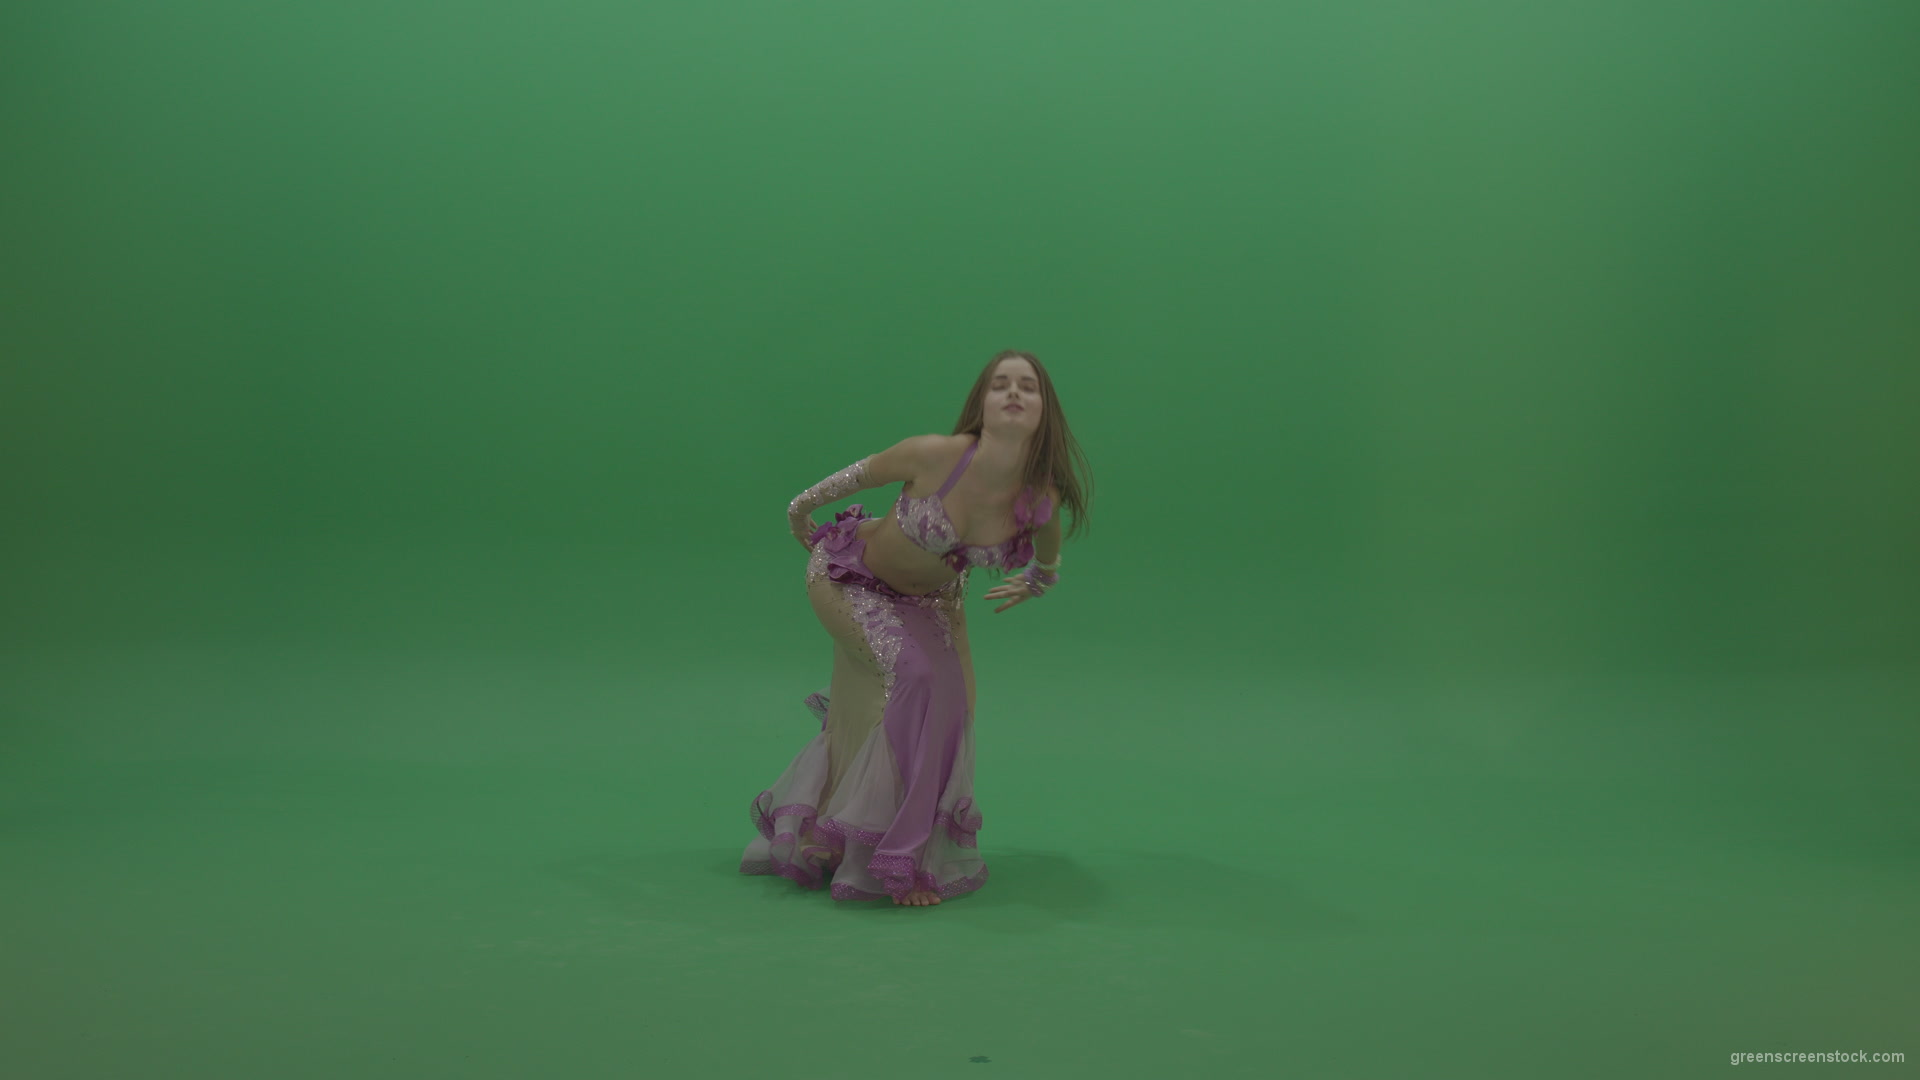 Beautiful-belly-dancer-display-amazing-dance-moves-over-chromakey-background_007 Green Screen Stock